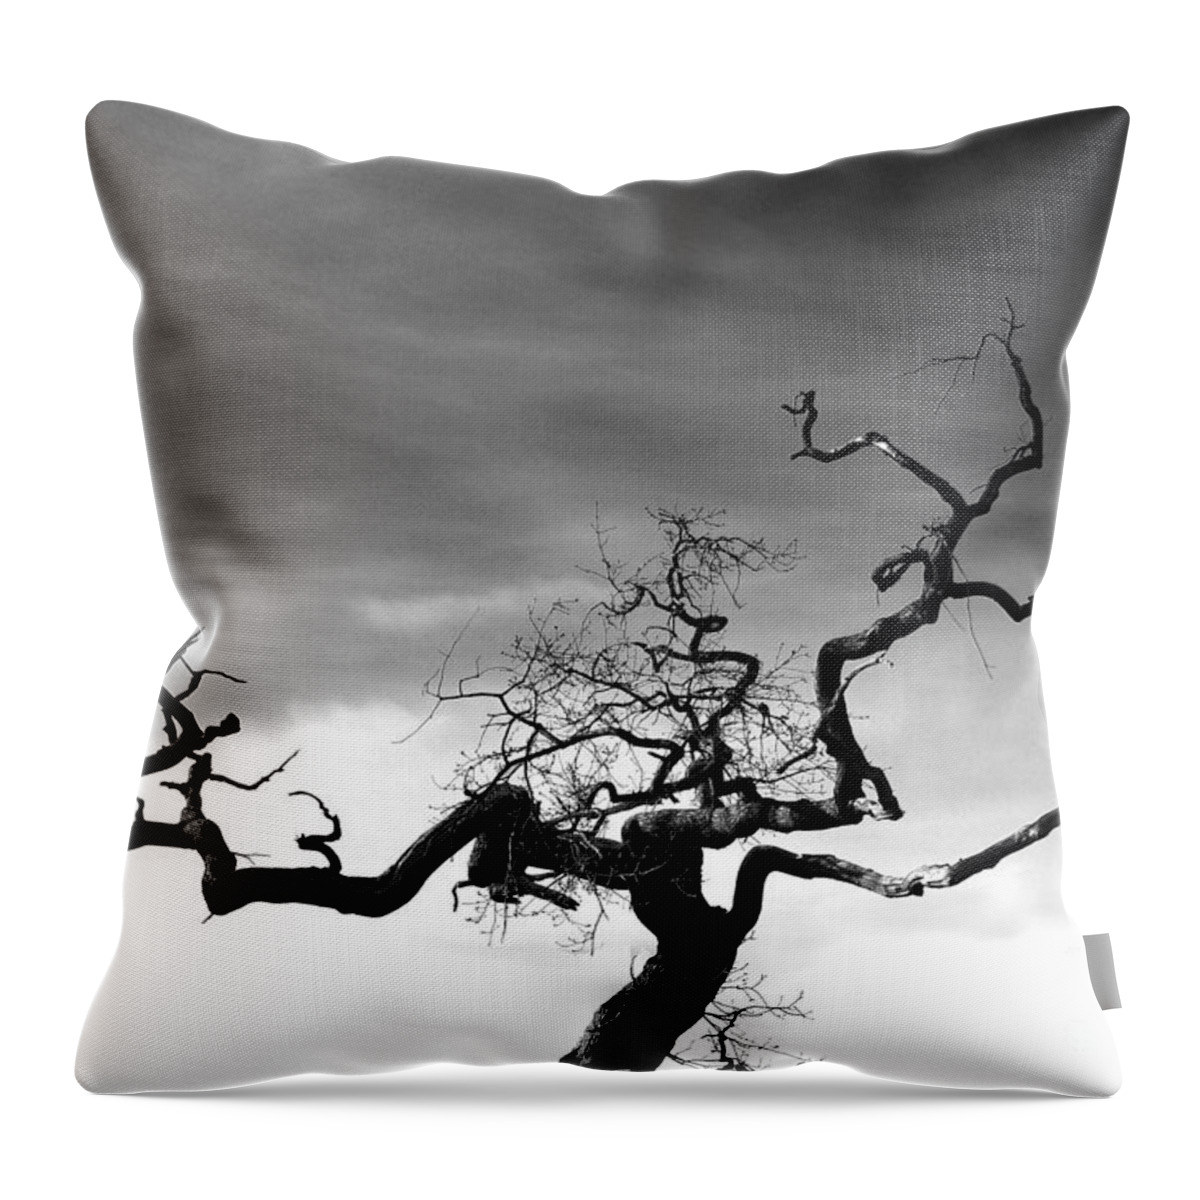 Tormented In Grey Throw Pillow featuring the photograph Tormented In Grey by Paul Davenport